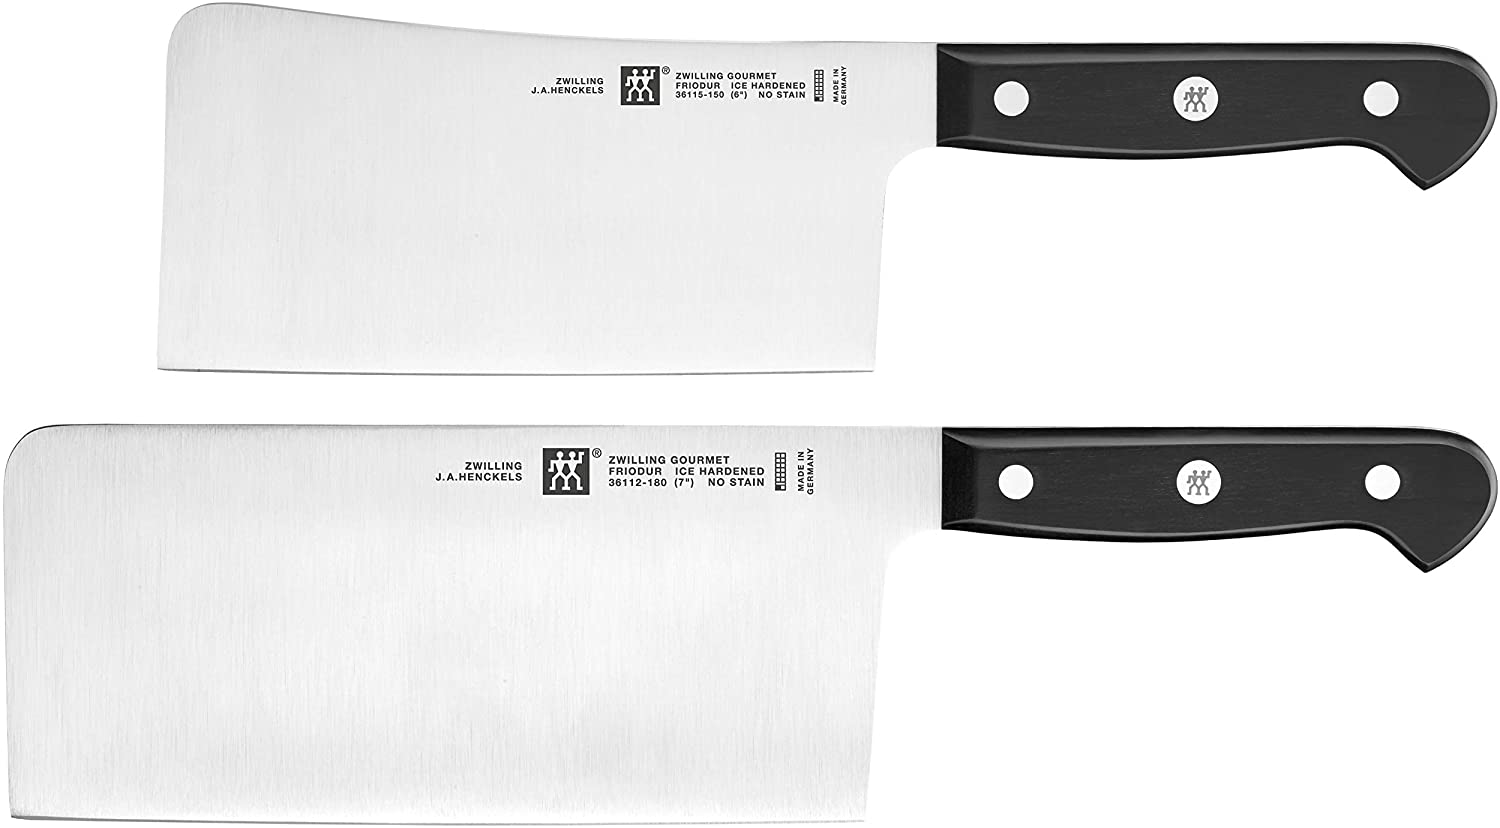 Zwilling \'Gemini \"Gourmet 2 Piece Knife Set with Cleaver and Chinese Chef\'s Knife